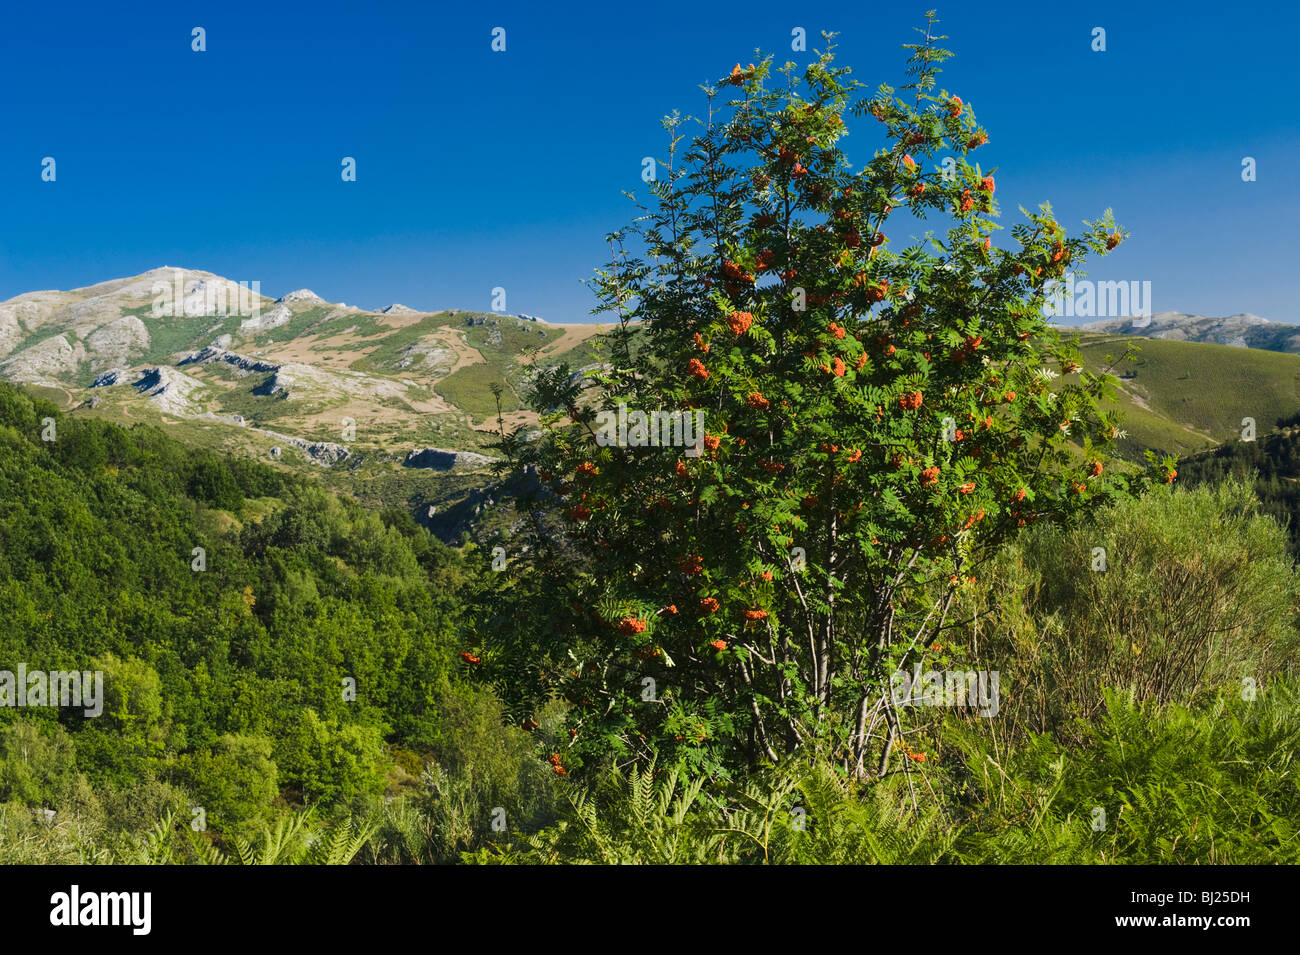 Rowan tree with berries, near Curavacas, a high limestone mountain in the Cantabrian Mountains of northern Spain Stock Photo